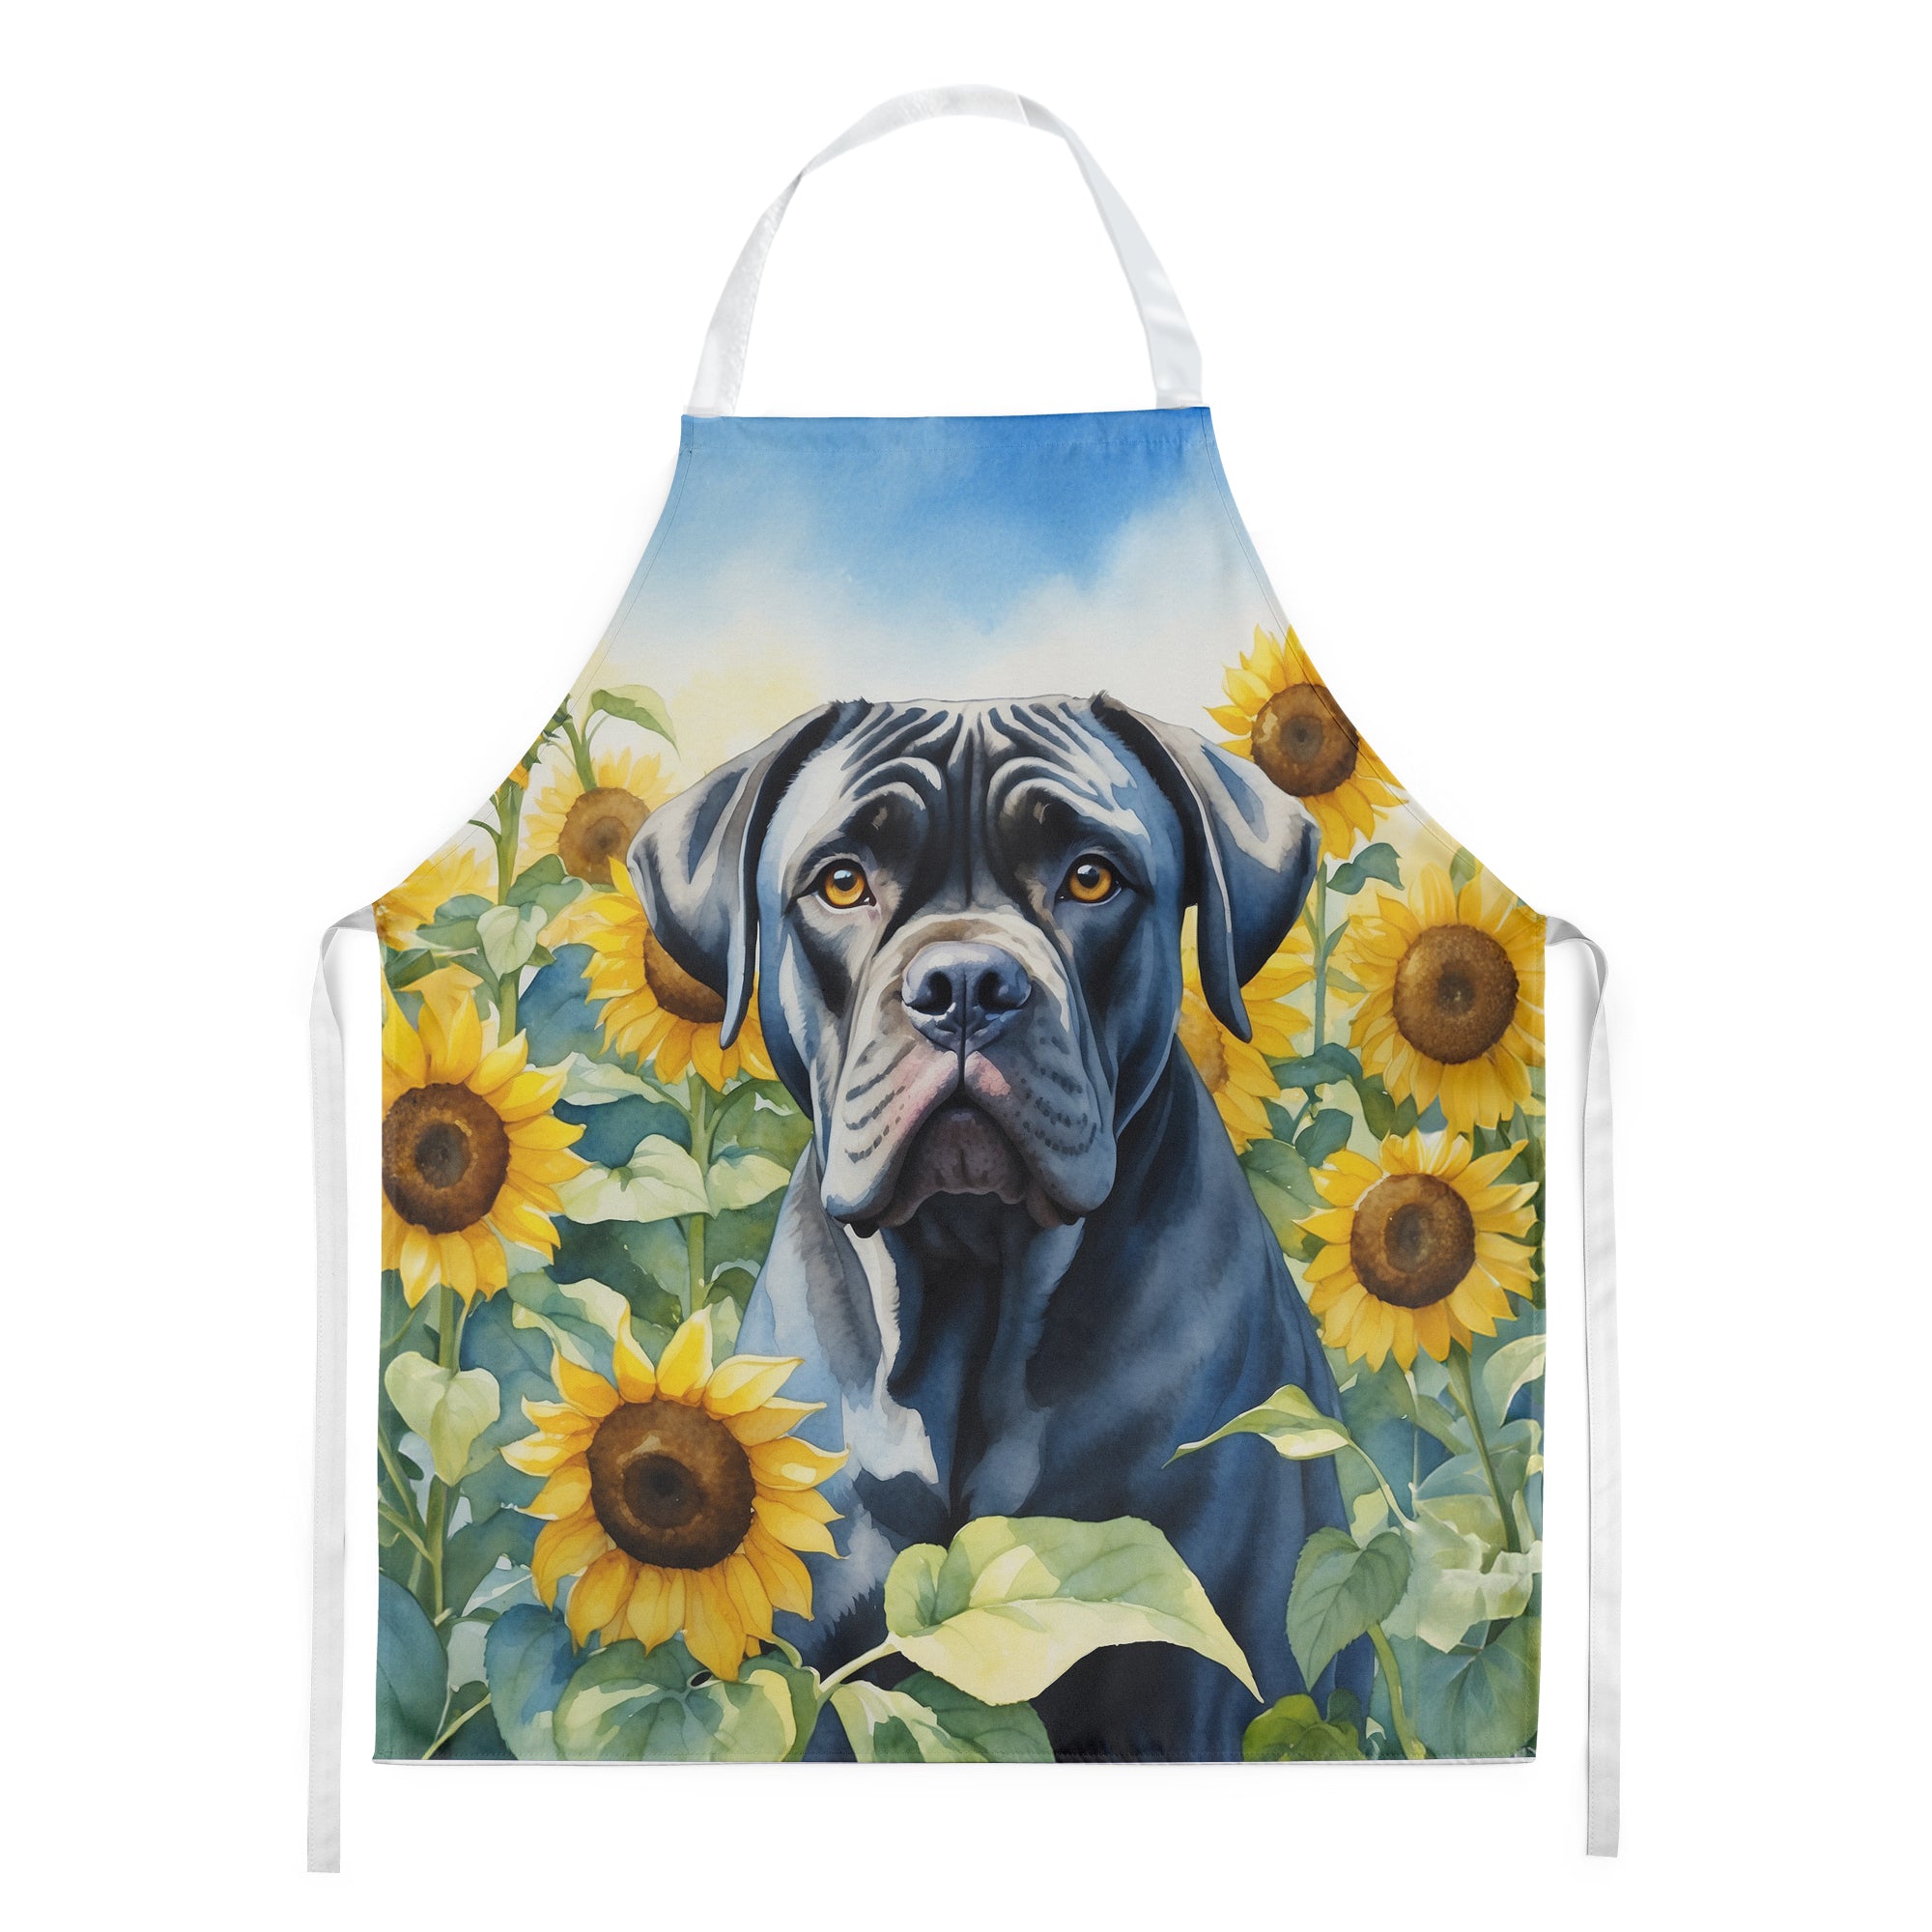 Buy this Cane Corso in Sunflowers Apron